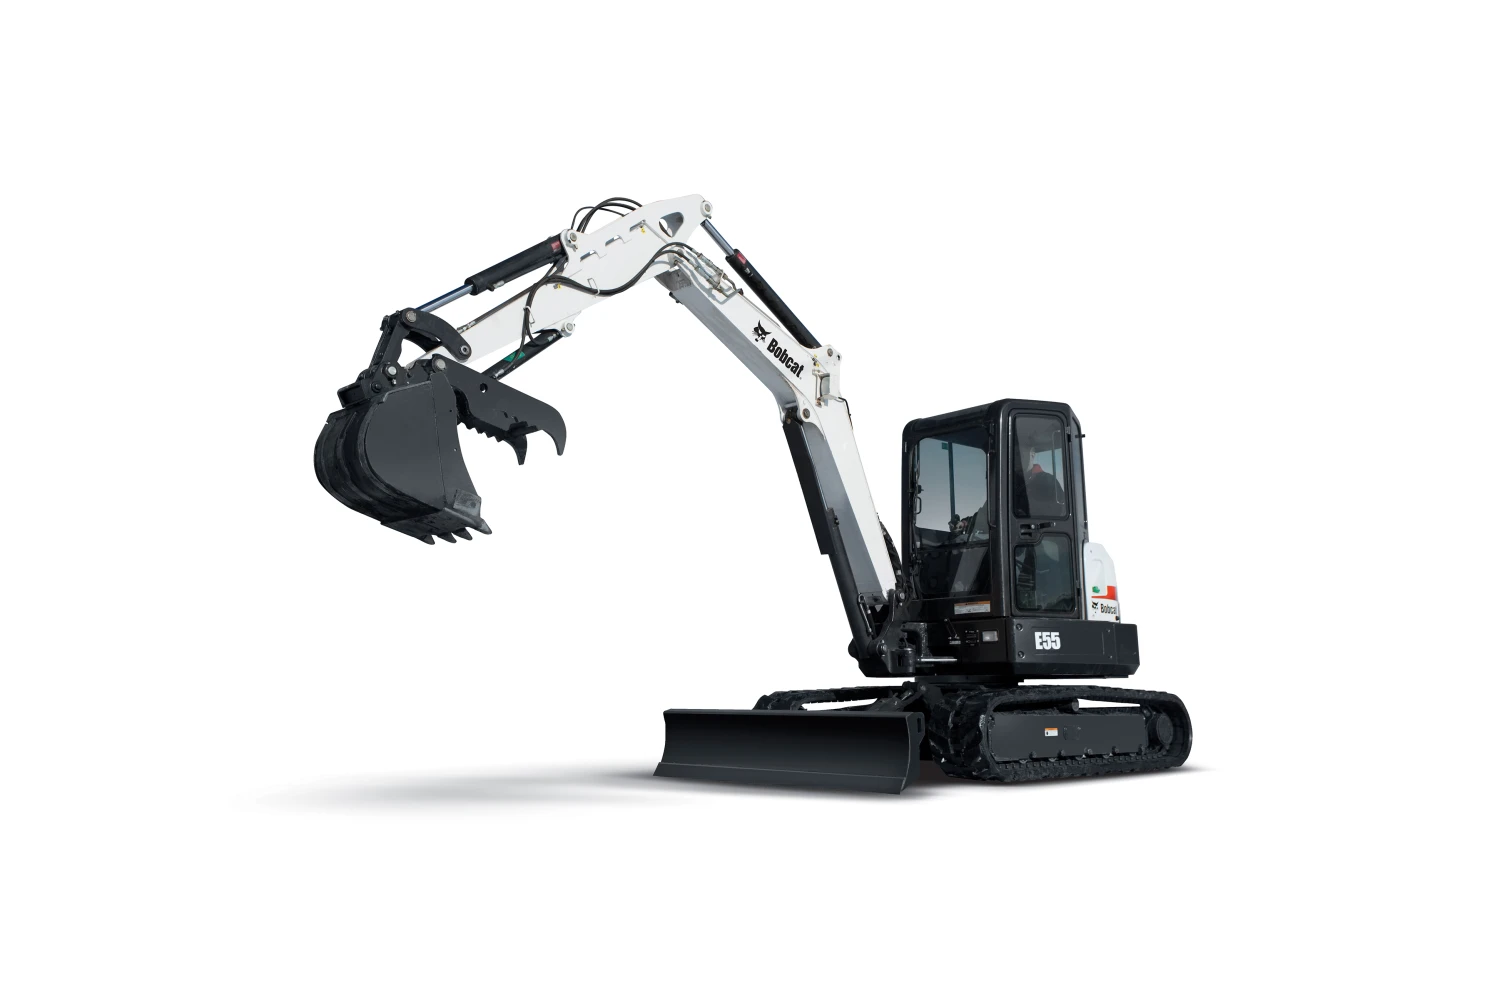 Browse Specs and more for the E55 Compact Excavator - White Star Machinery